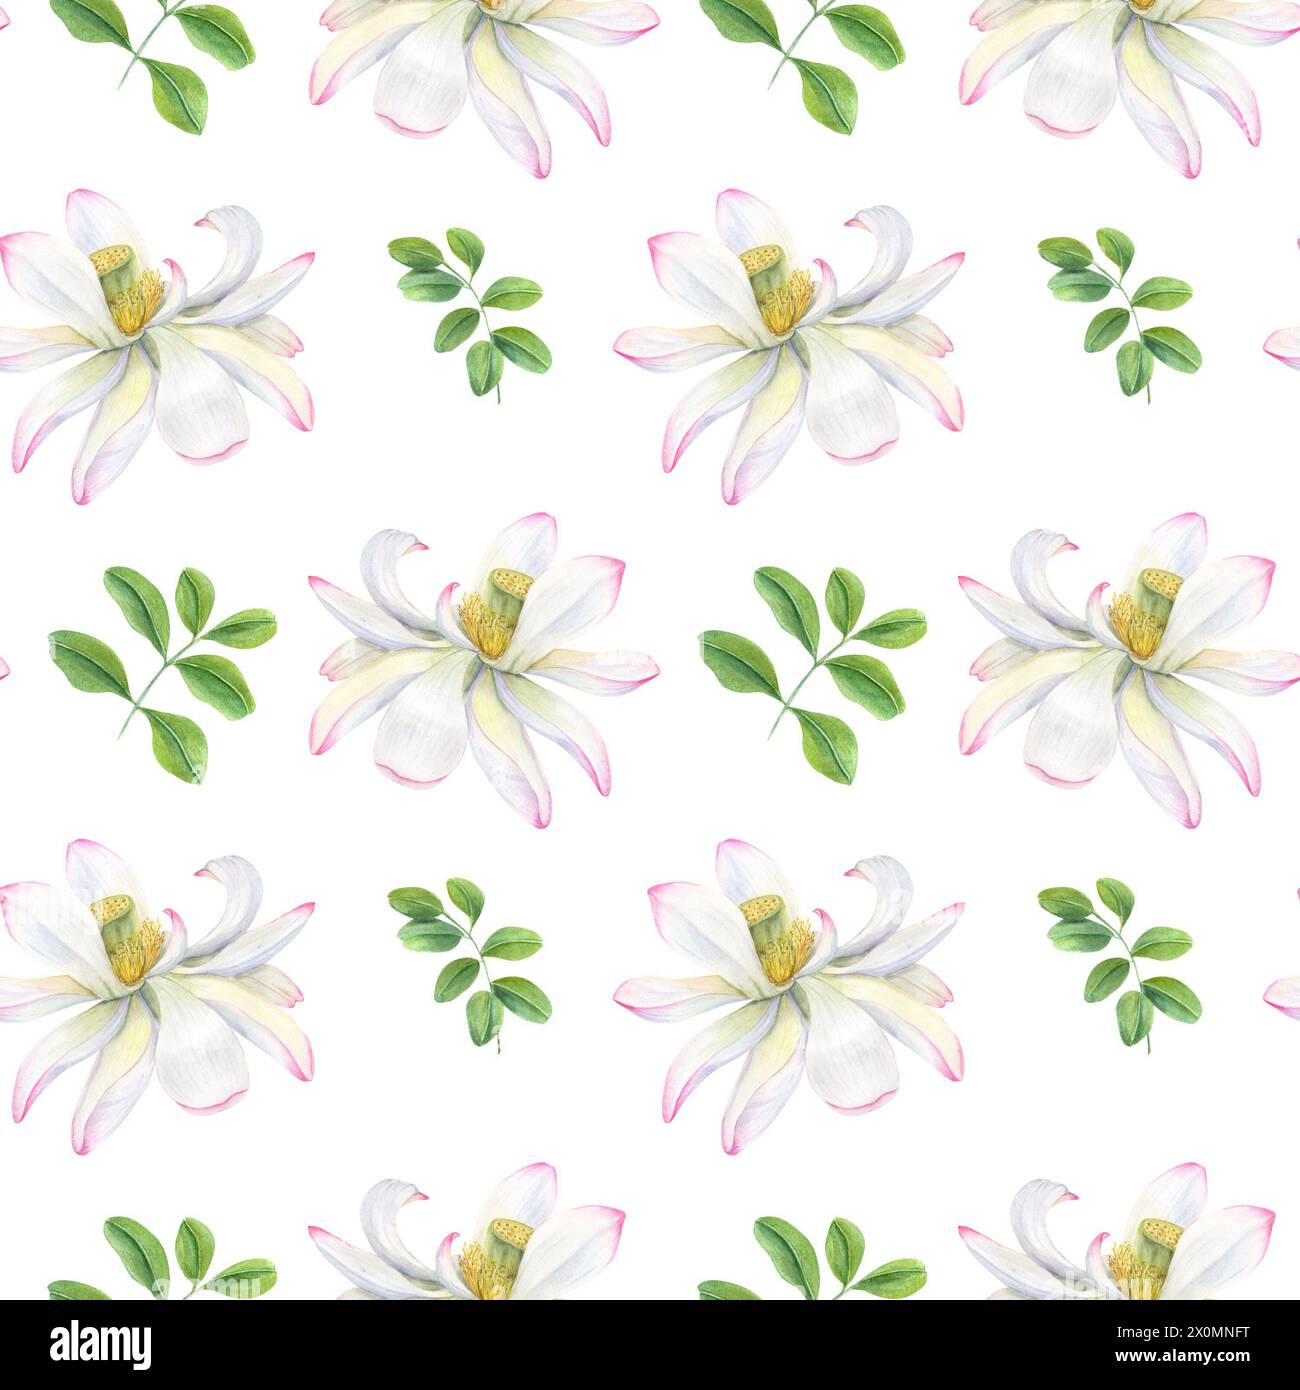 White lotus flowers with green tropical leaves. Seamless floral pattern. Waterlilies, clitoria leaf. Blooming exotic flowers. Watercolor illustration Stock Photo